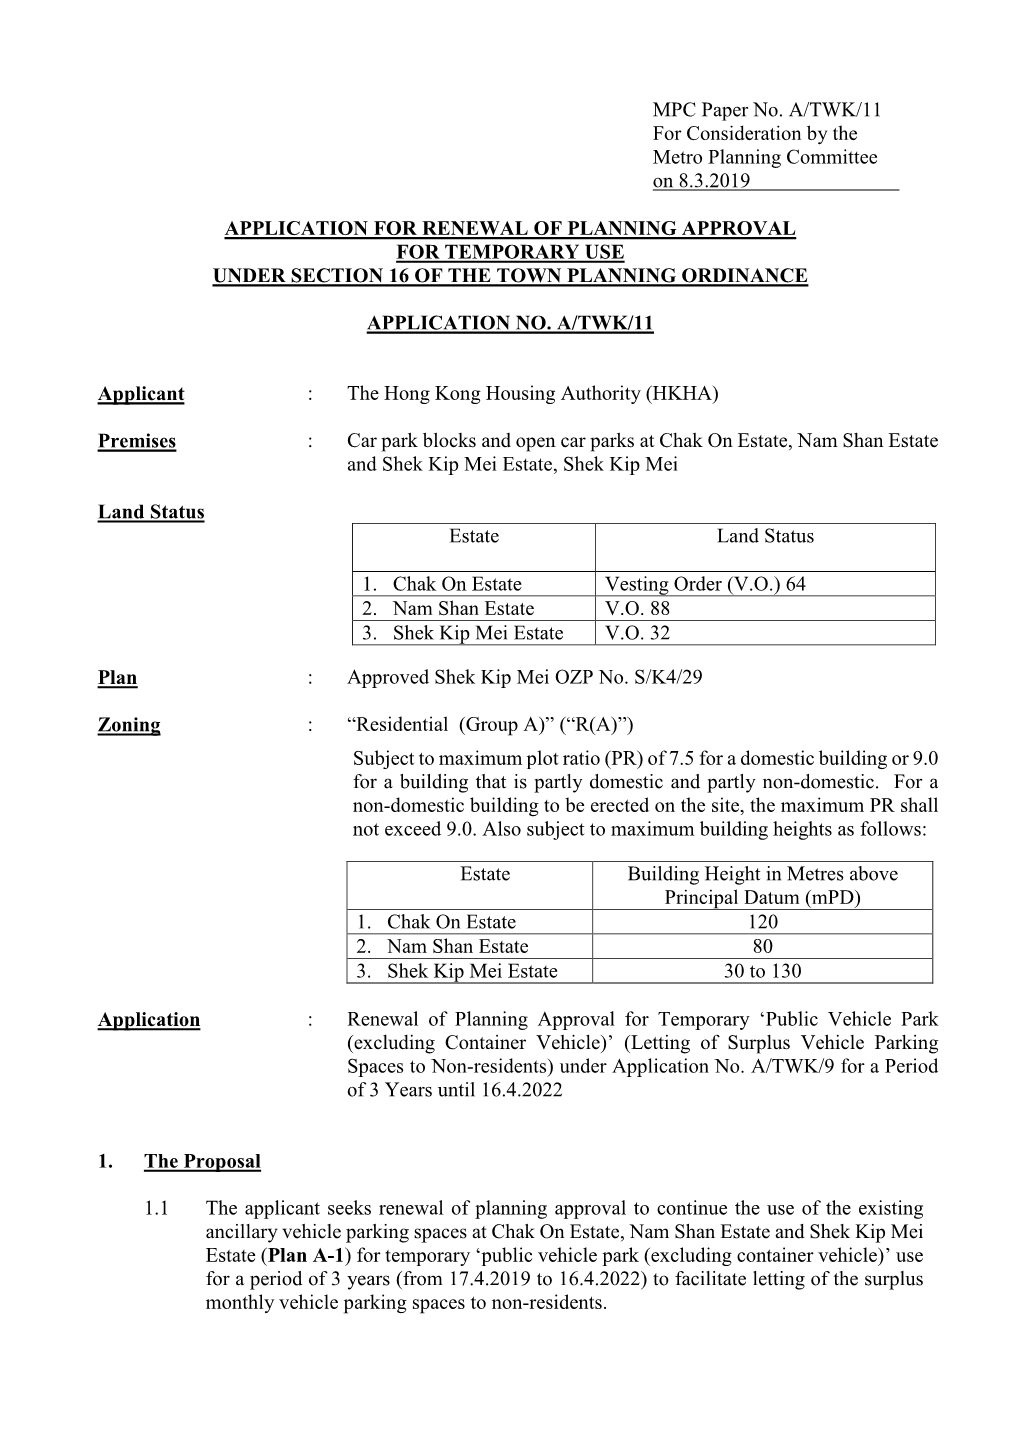 MPC Paper No. A/TWK/11 for Consideration by the Metro Planning Committee on 8.3.2019